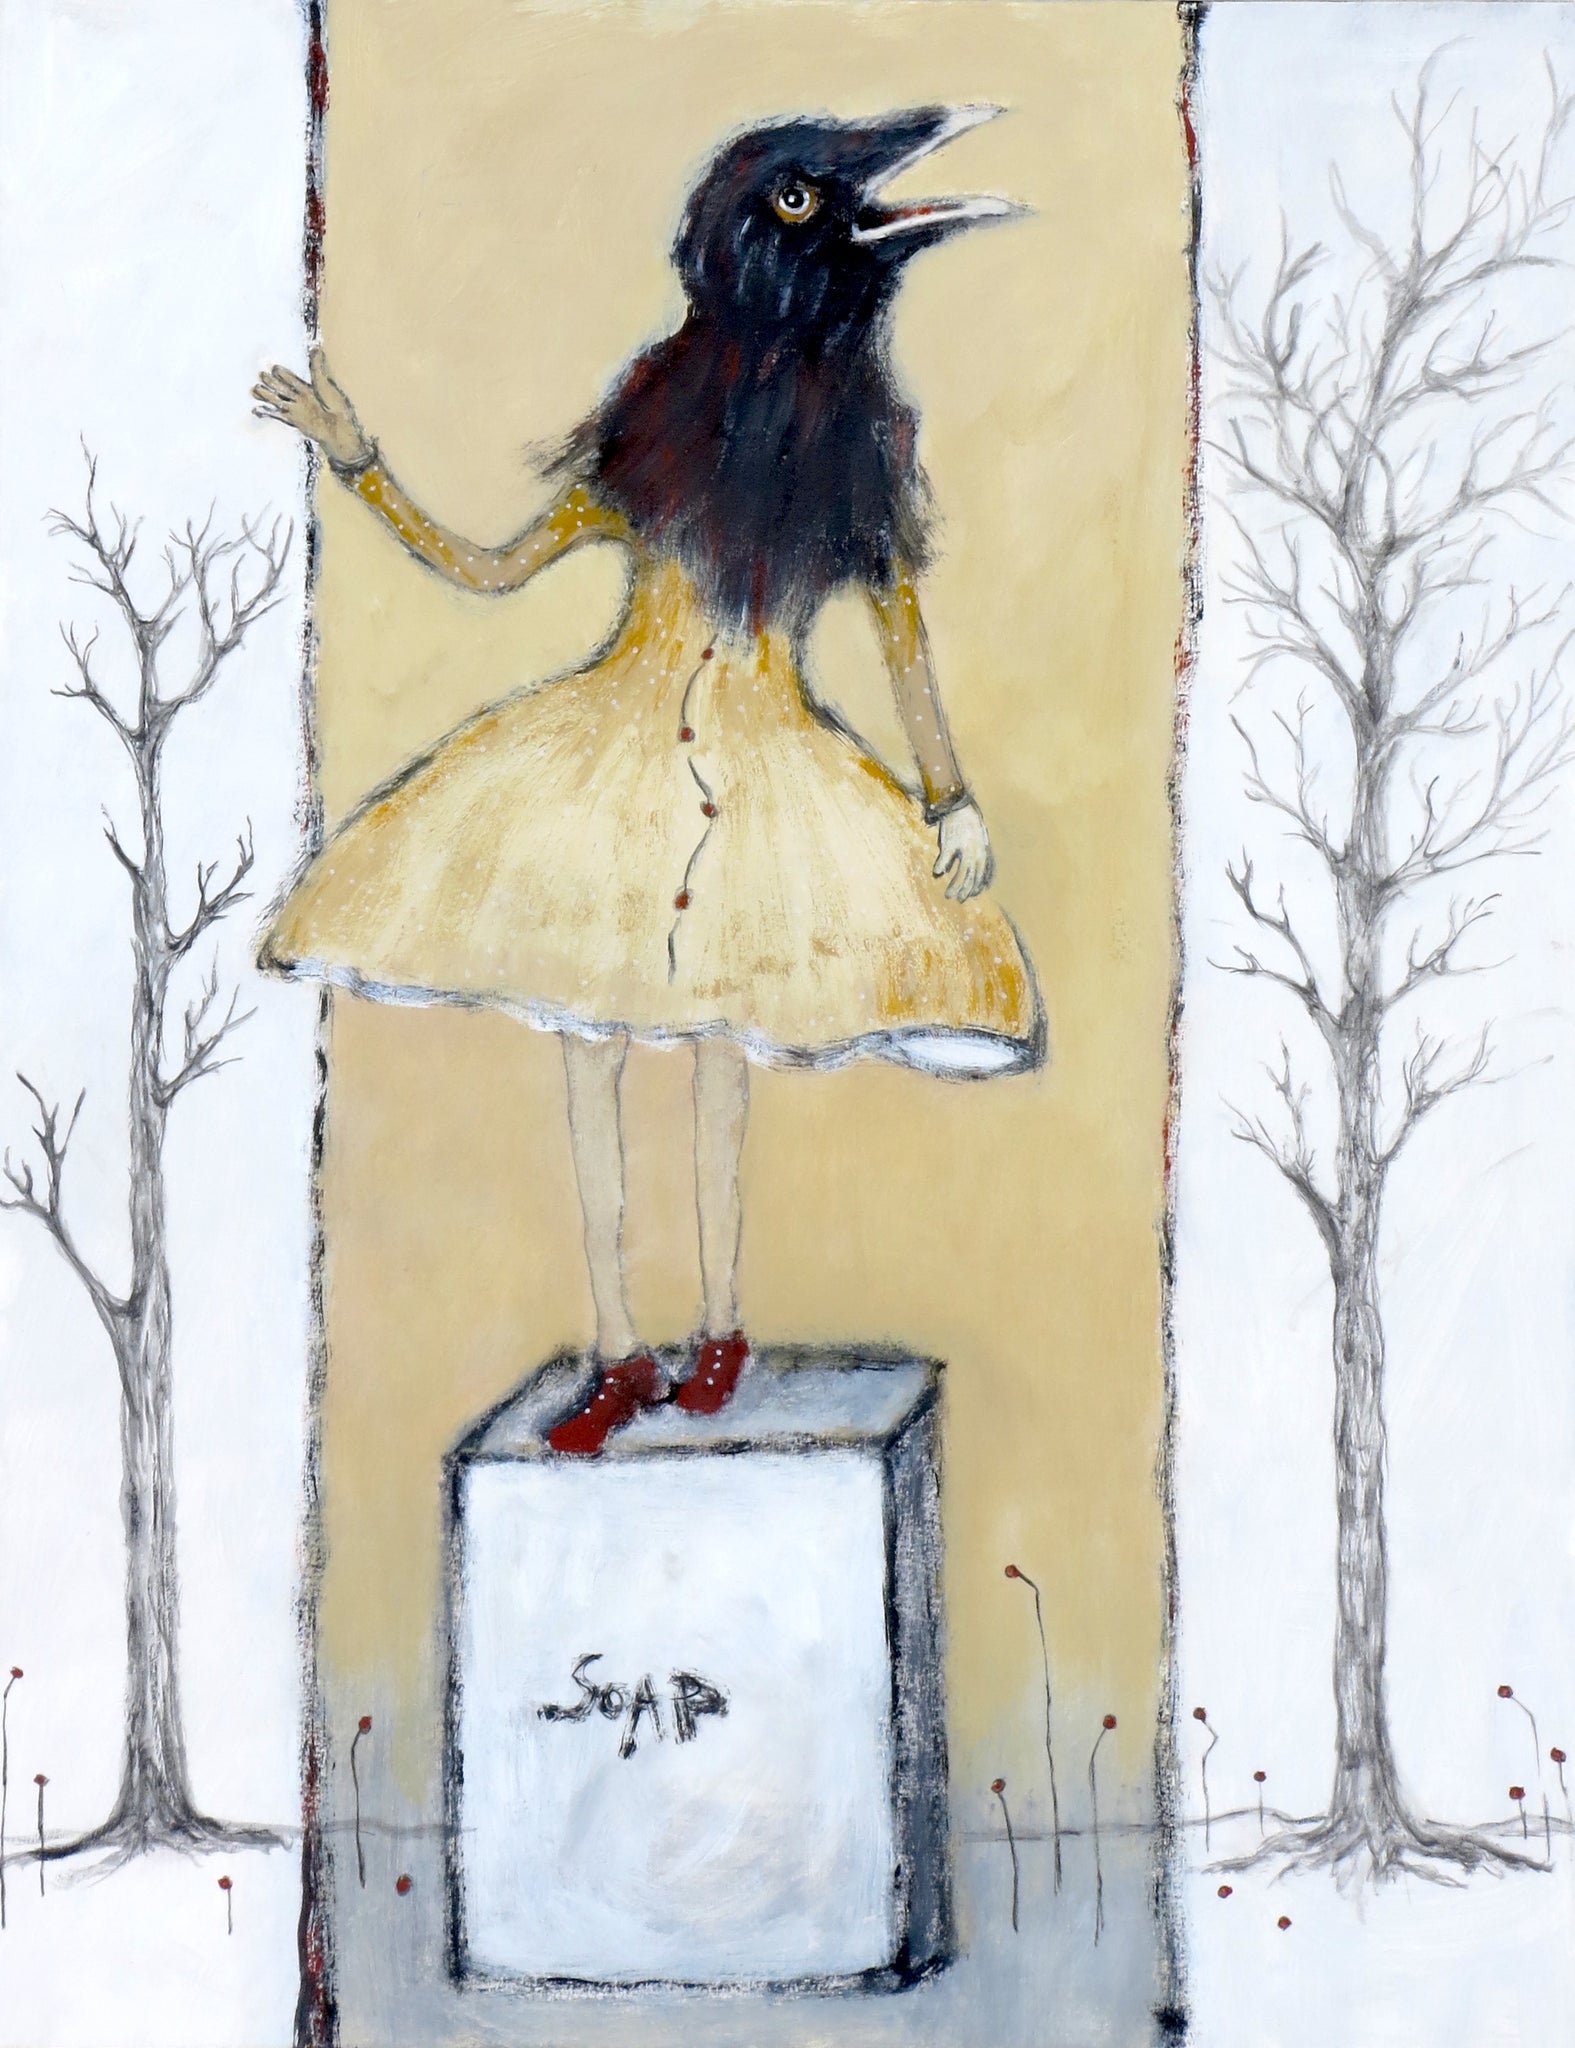 SOLD  "Raven Girl Sounds the Alarm" - part of the "Soap Box" series